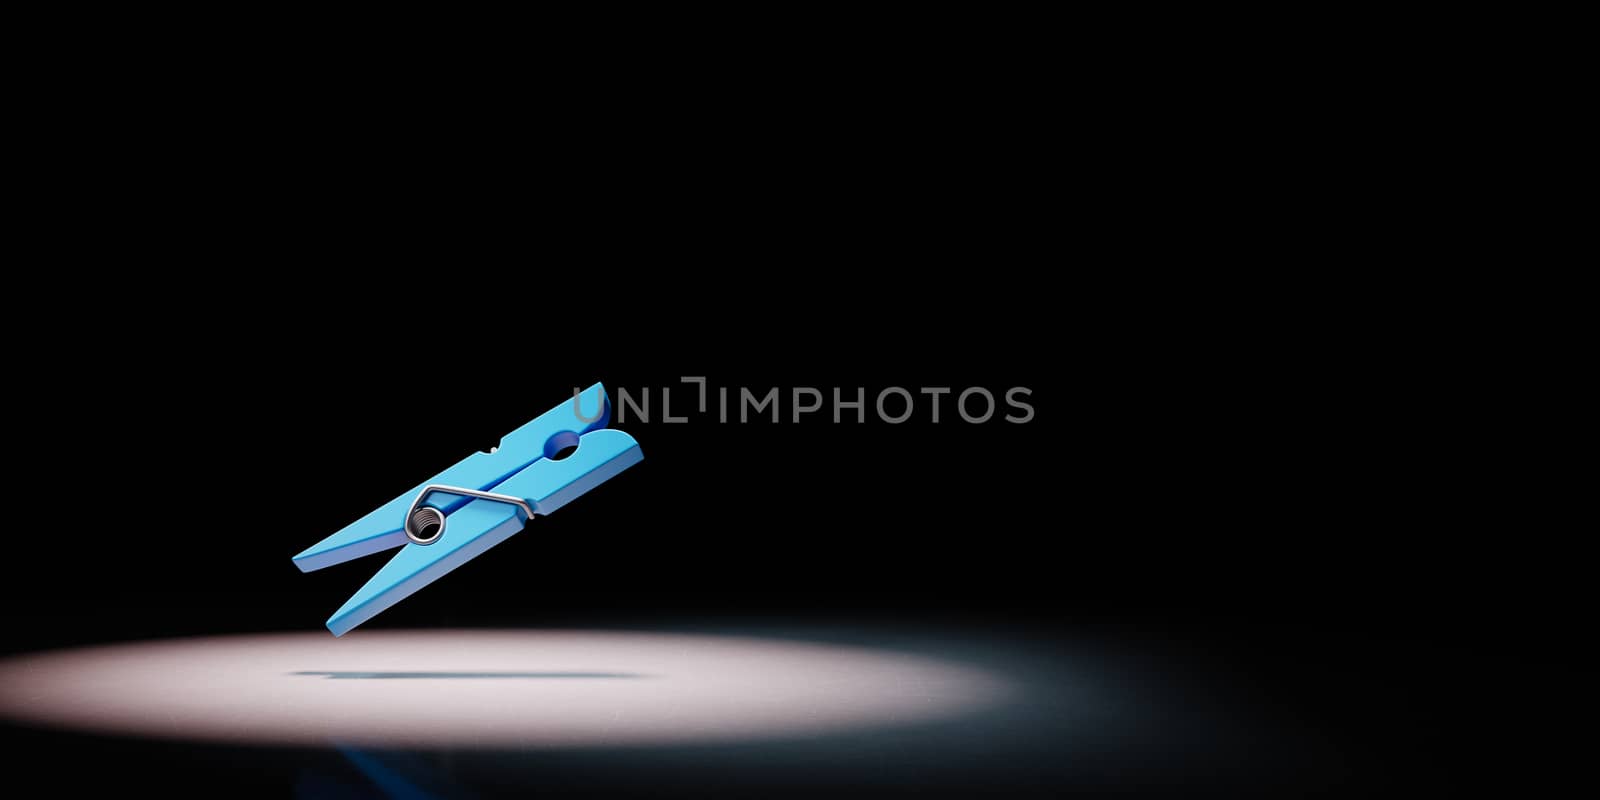 One Clothespin Spotlighted on Black Background by make